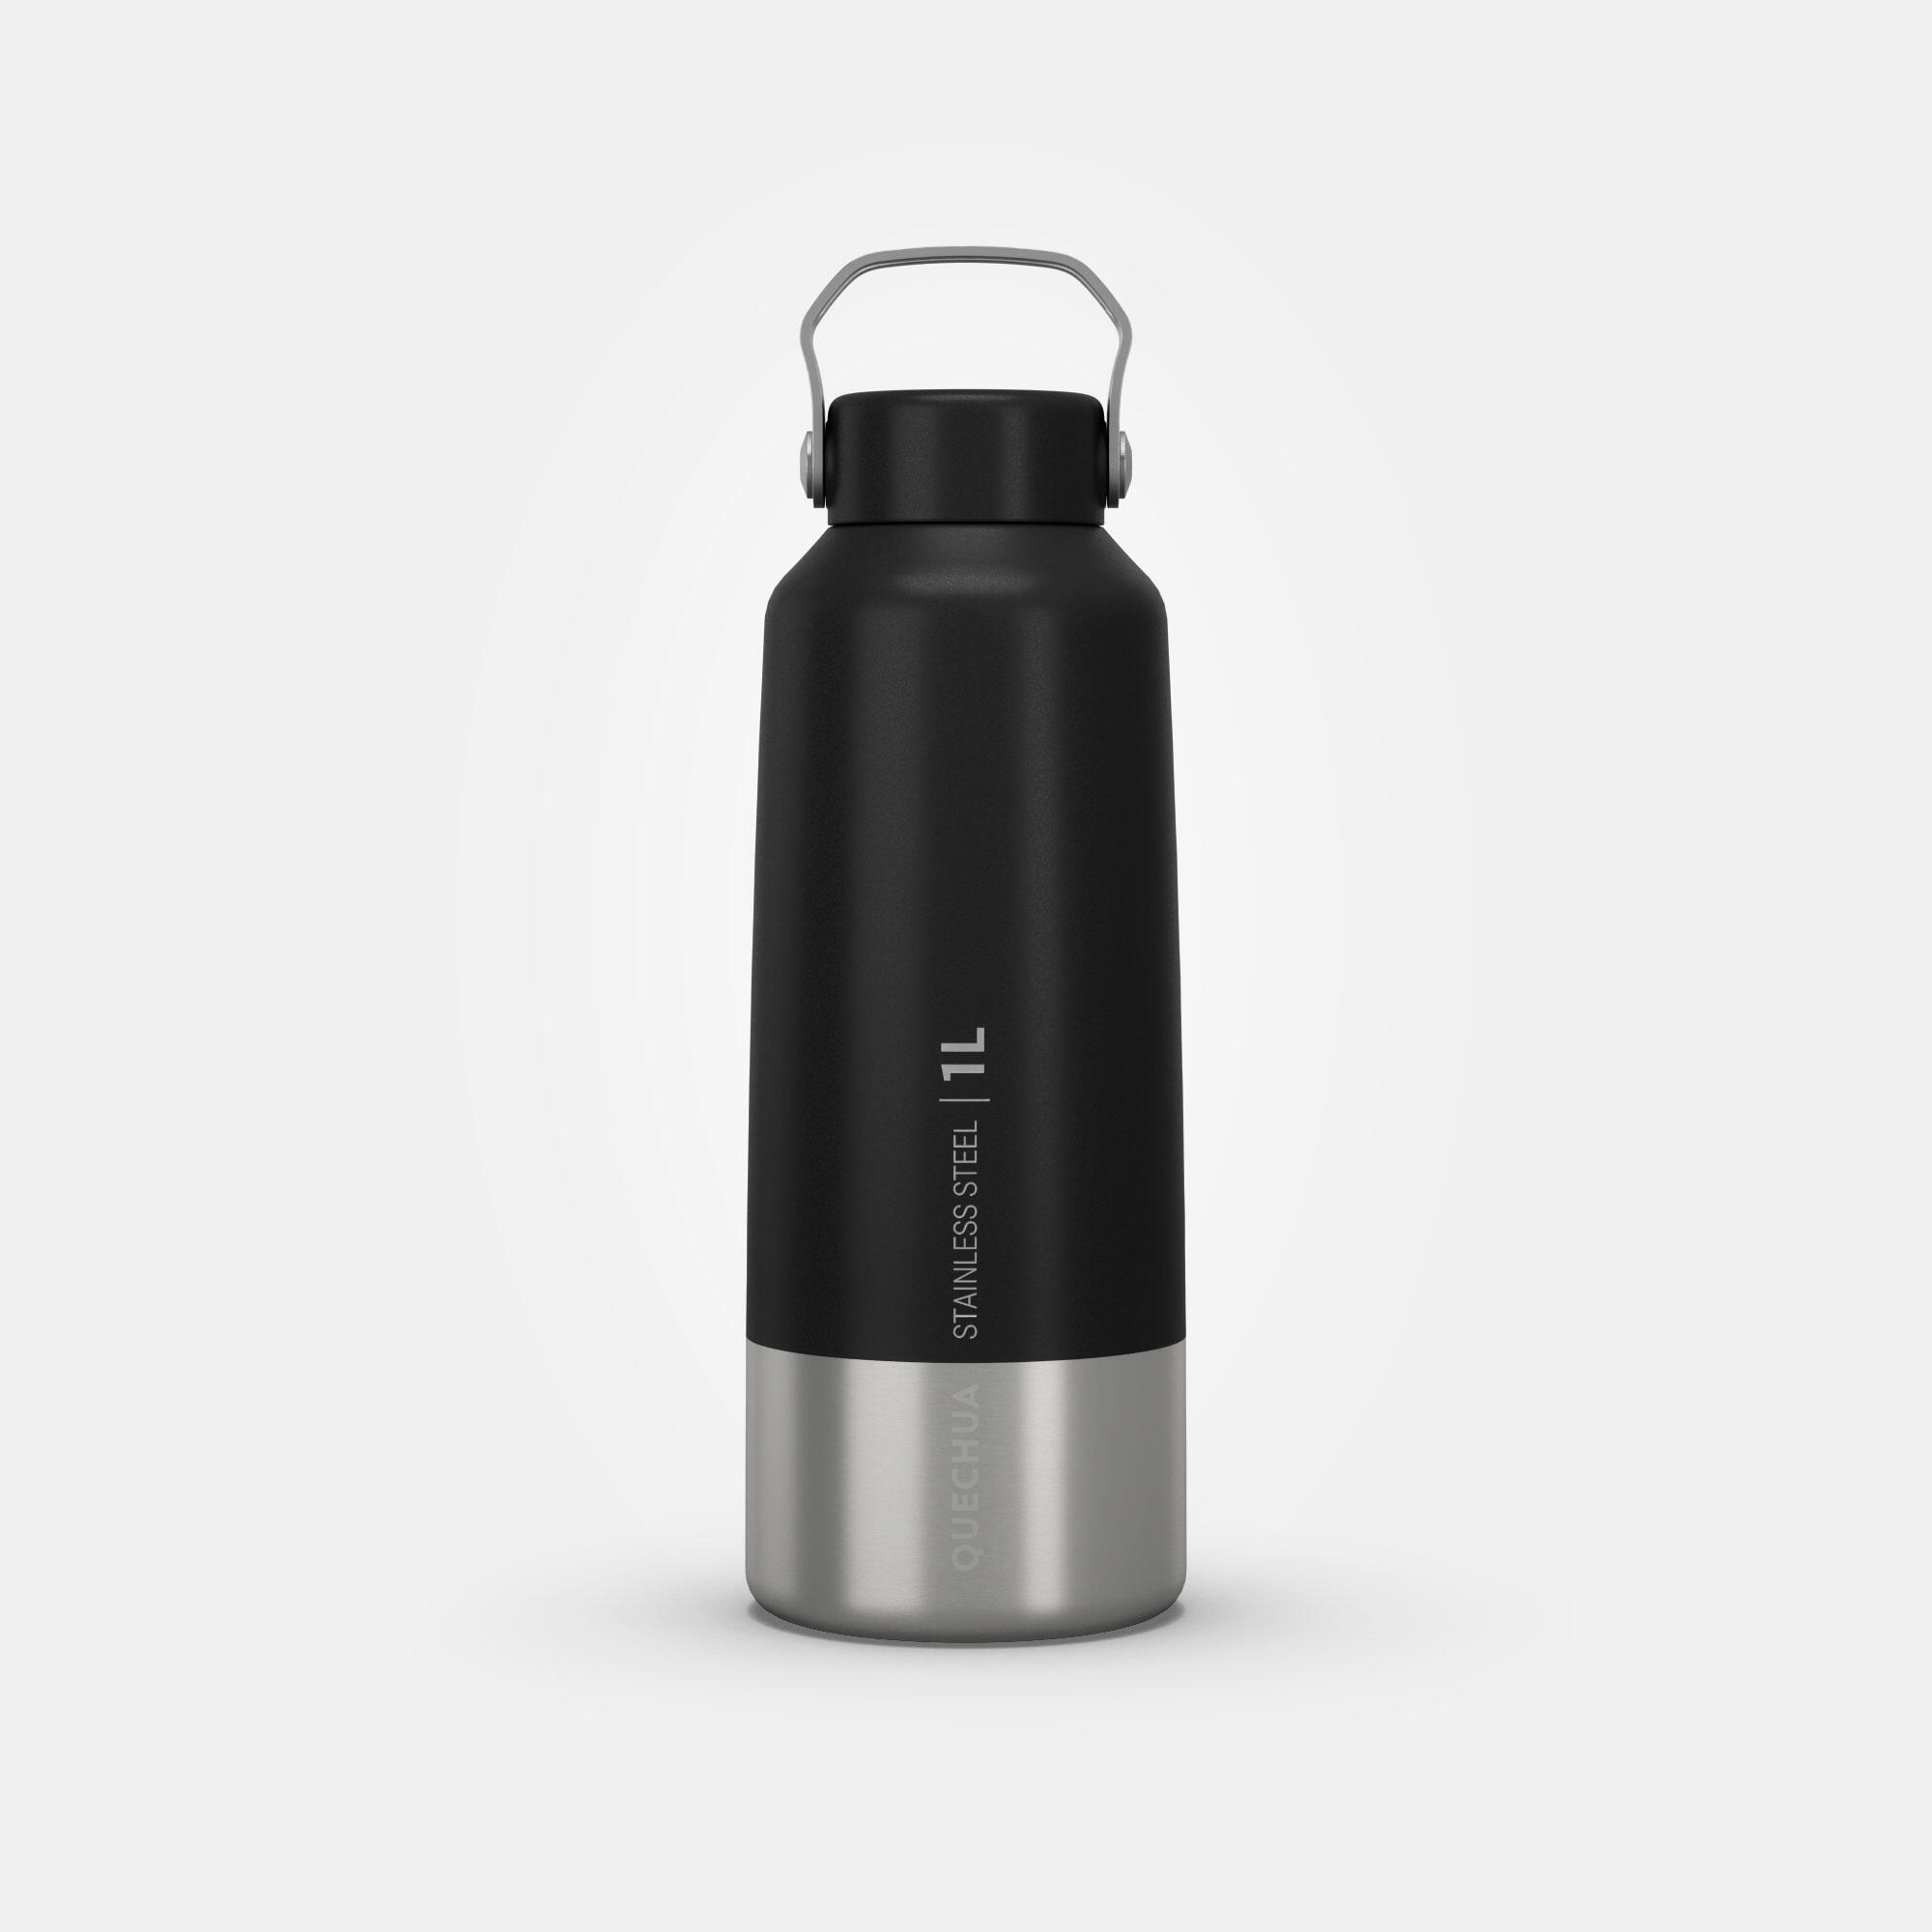 Stainless Steel Hiking Water Bottle - MH 100 - QUECHUA